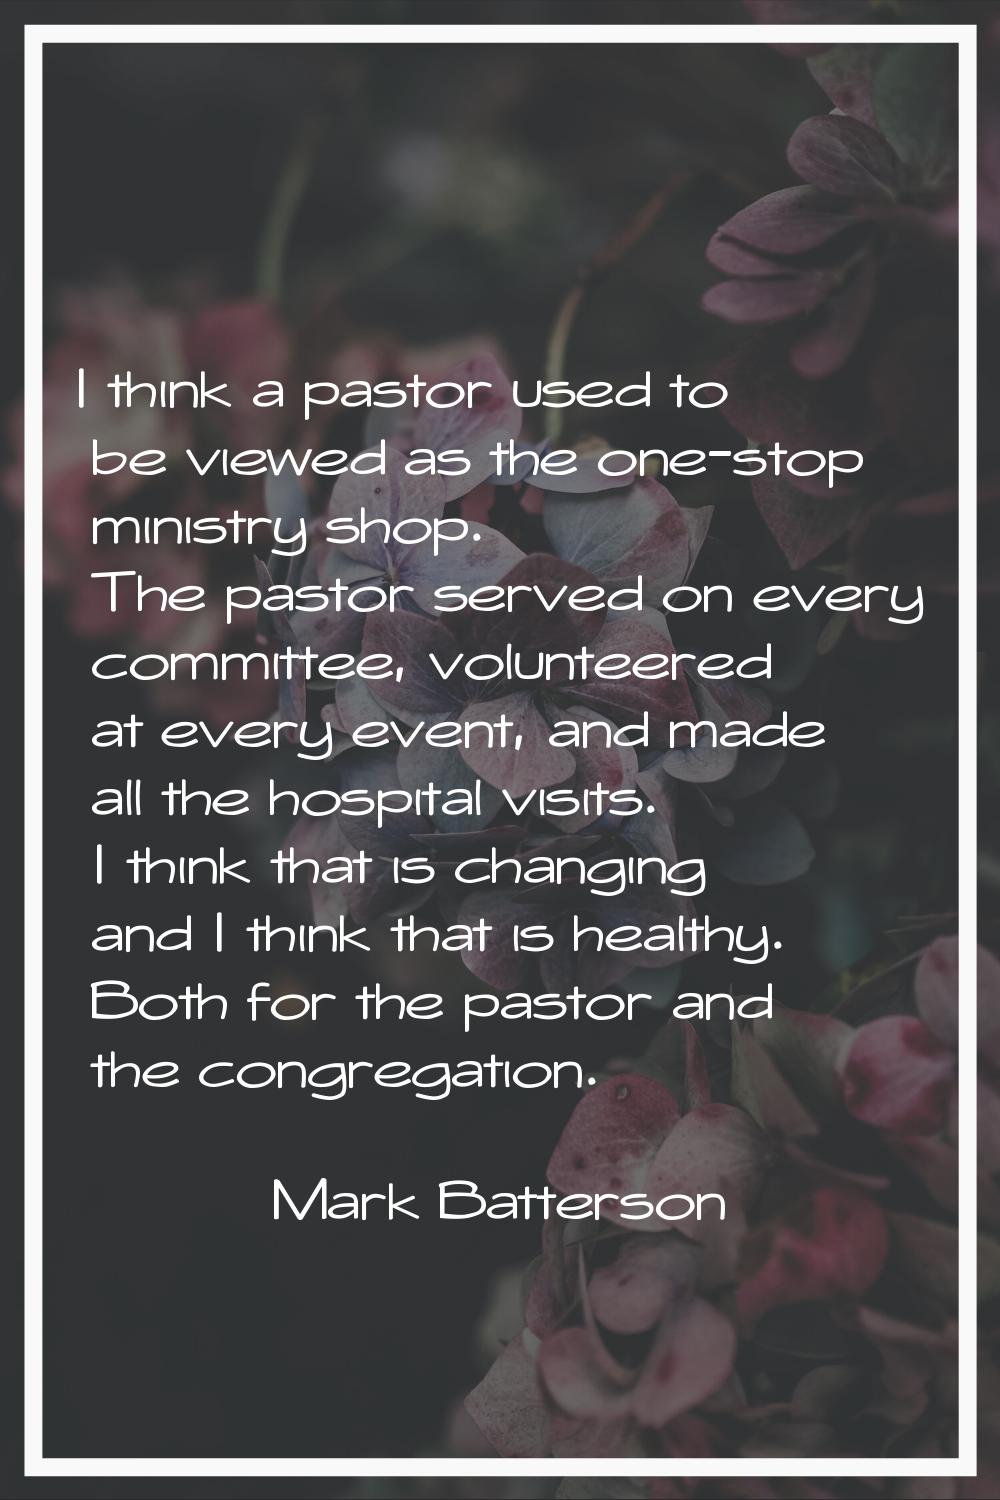 I think a pastor used to be viewed as the one-stop ministry shop. The pastor served on every commit